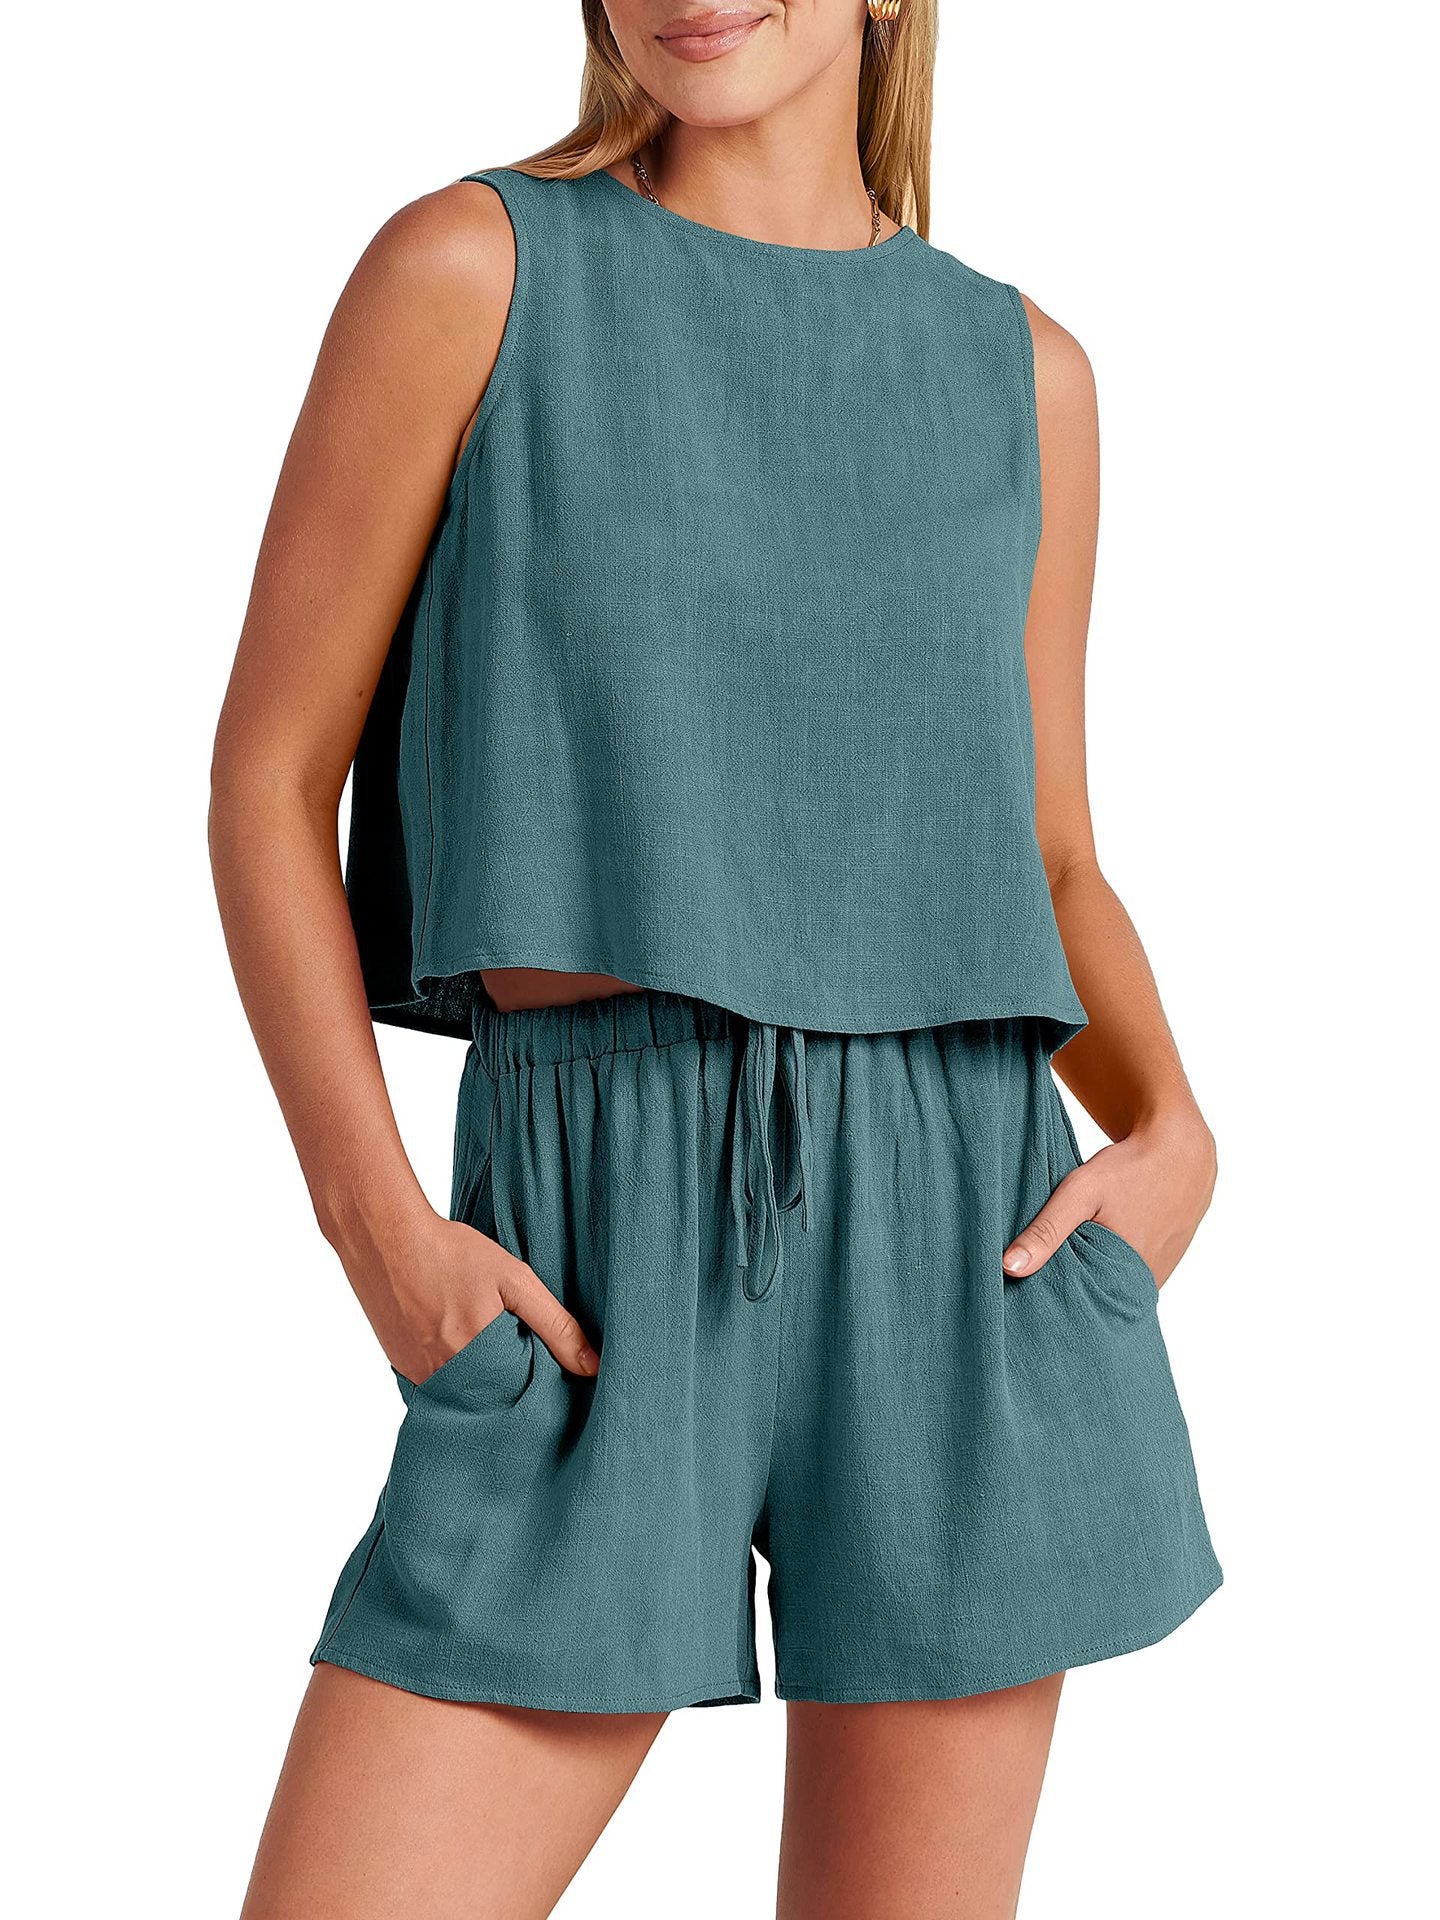 Women's Casual Sleeveless Loose Cotton Linen Shorts Two-piece Suit